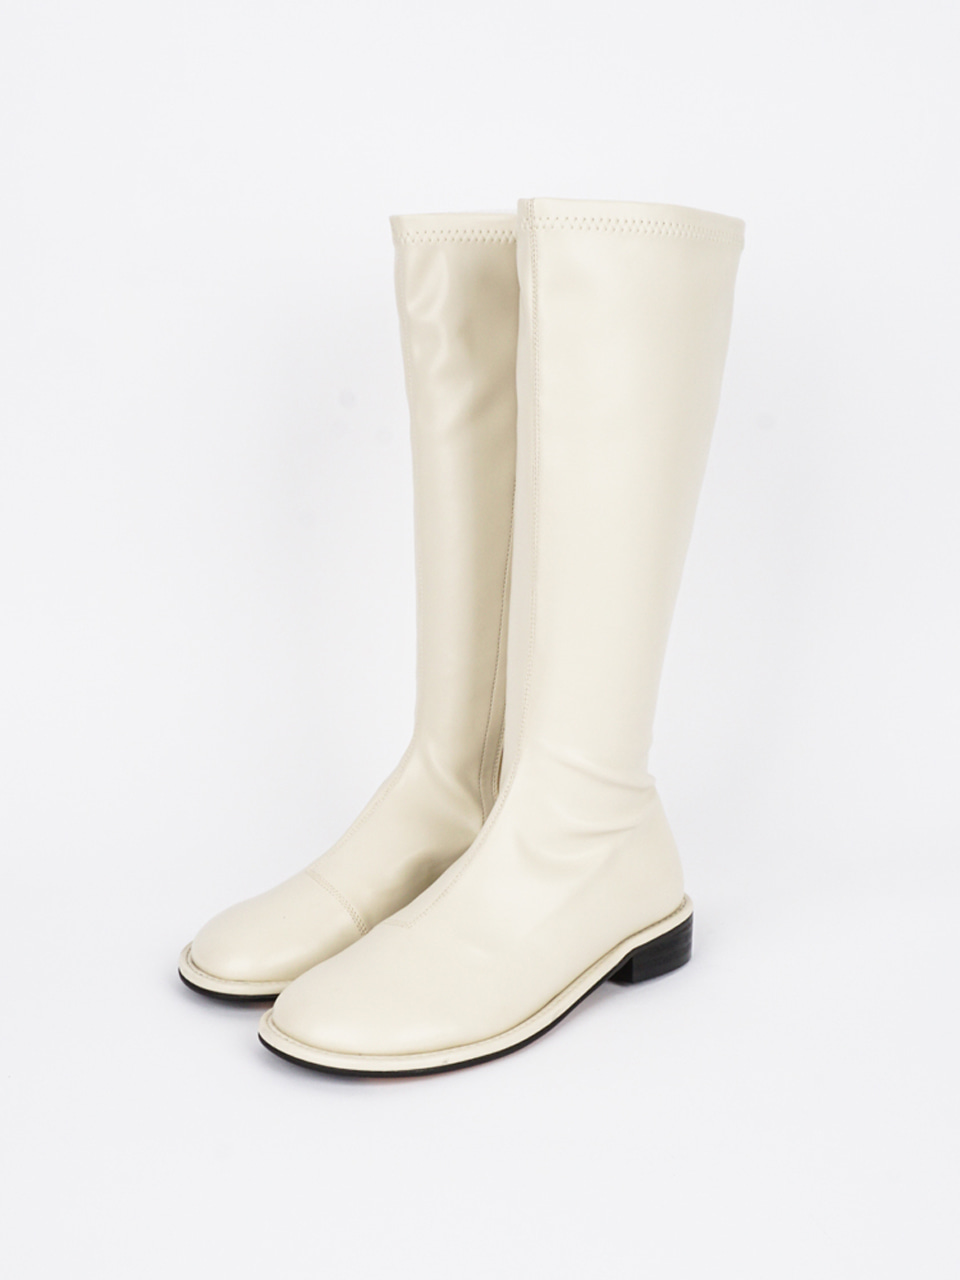 Span long boots (Ivory)